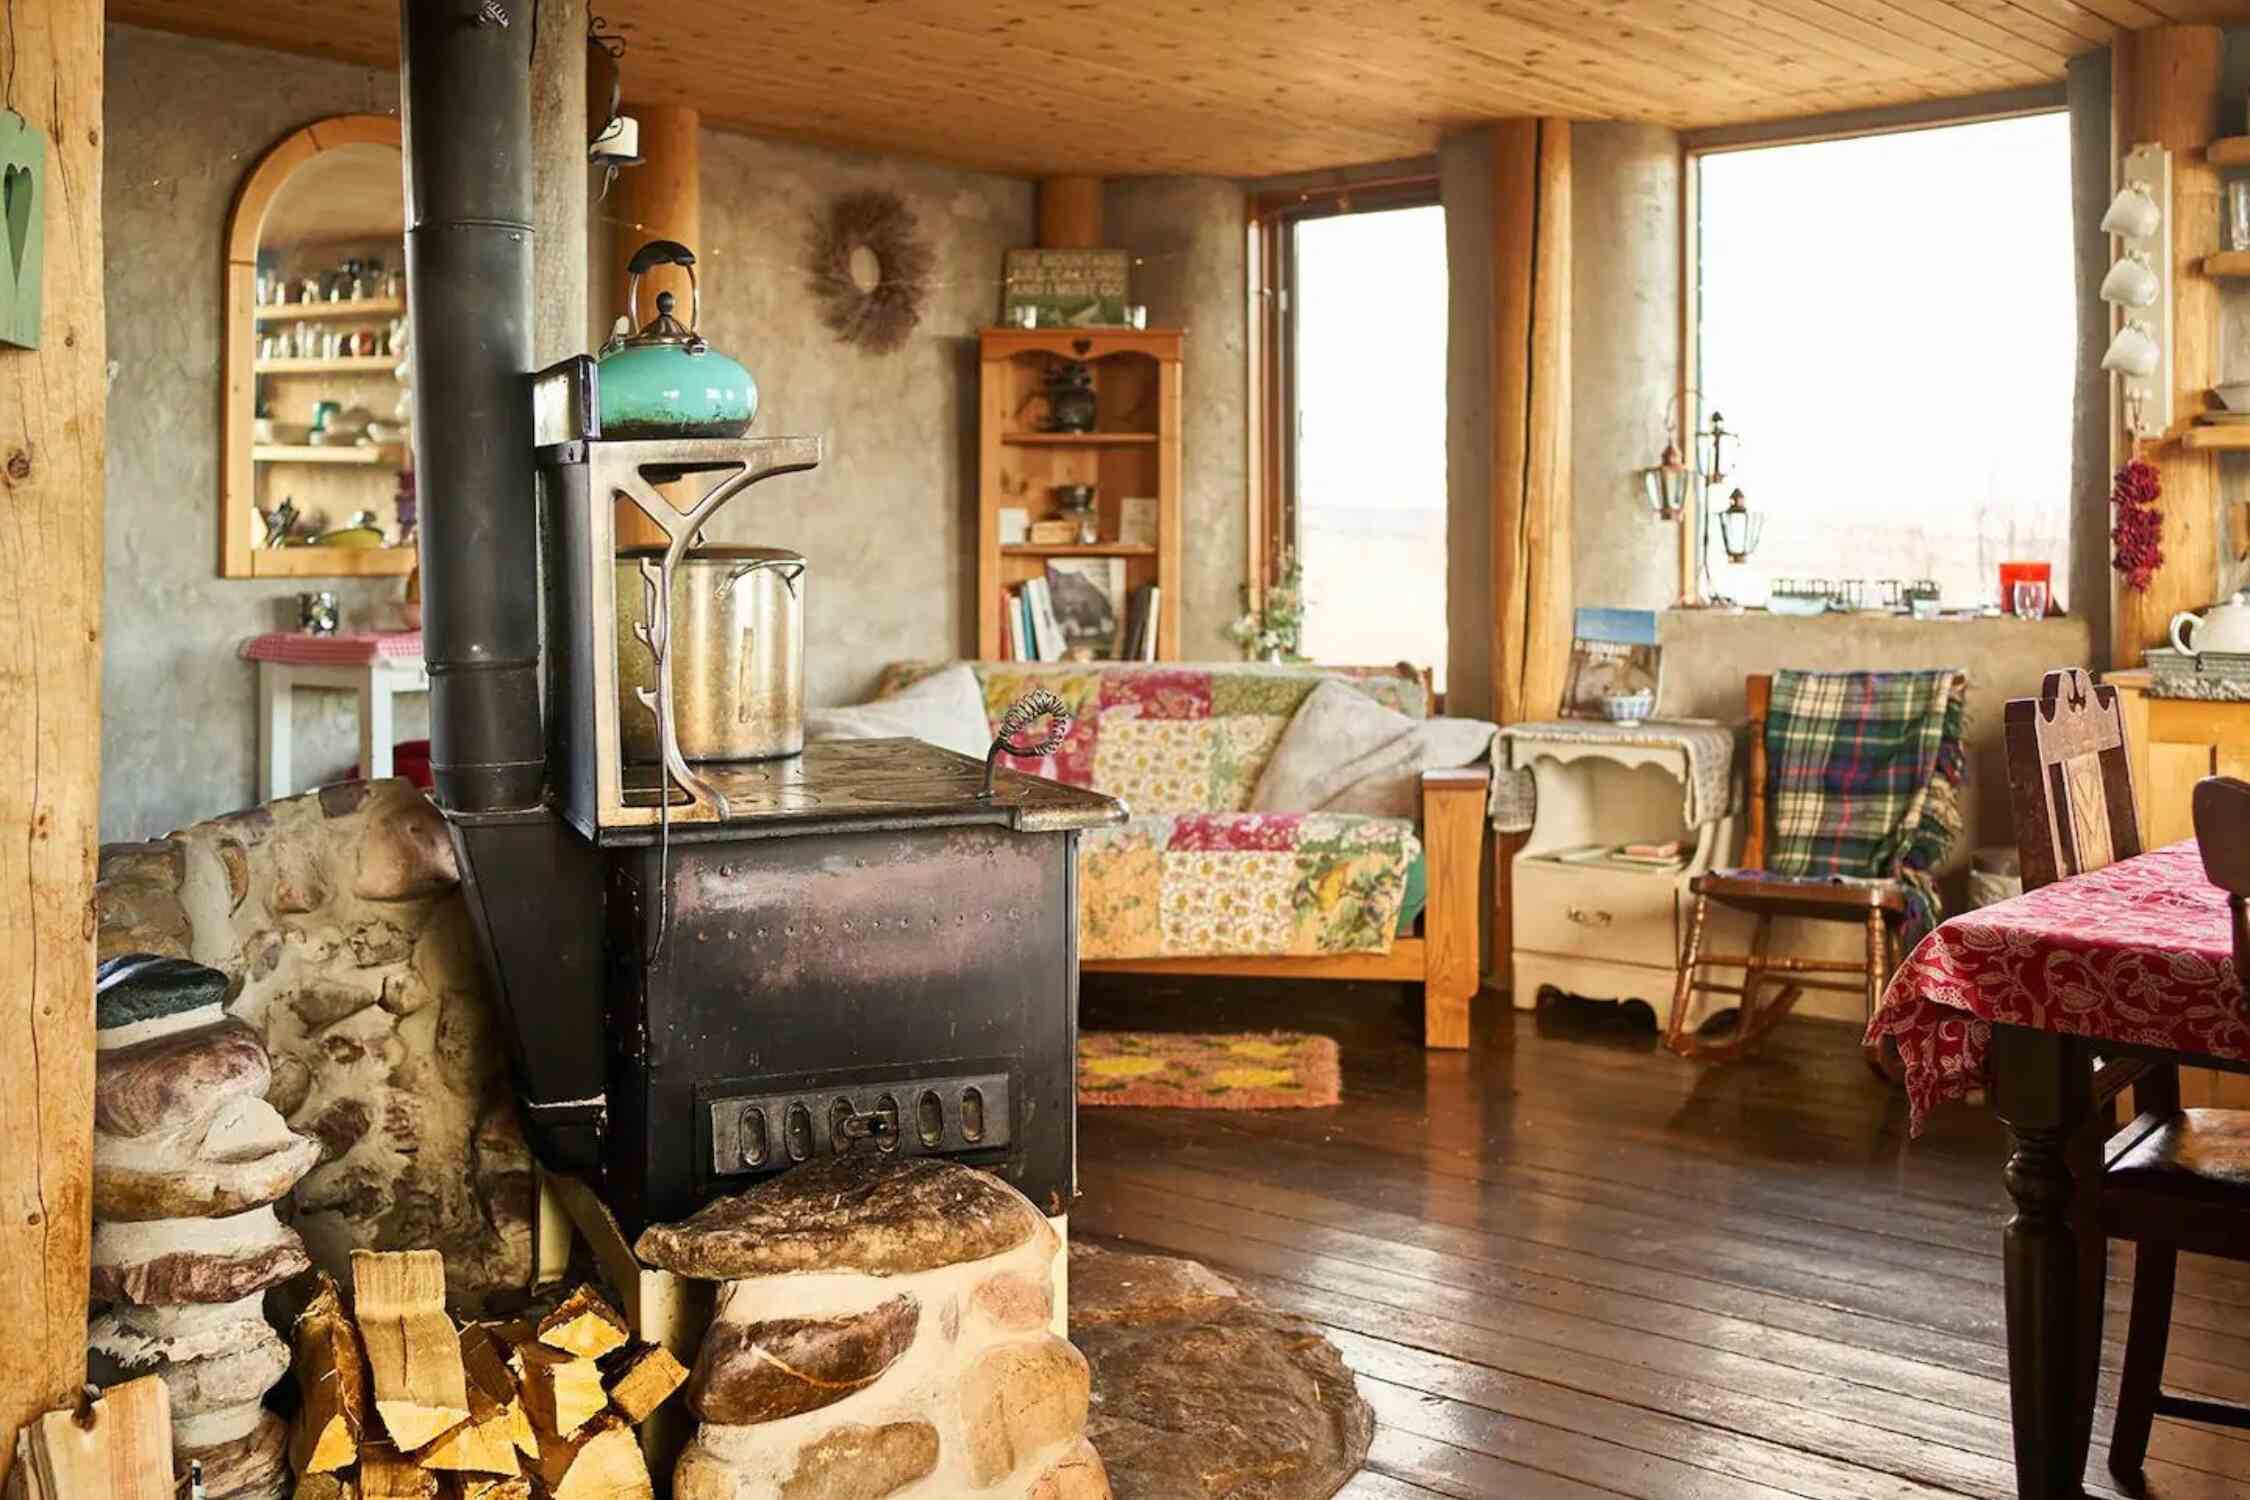 Cozy Eco Cabin - Off Grid - Connected to Nature